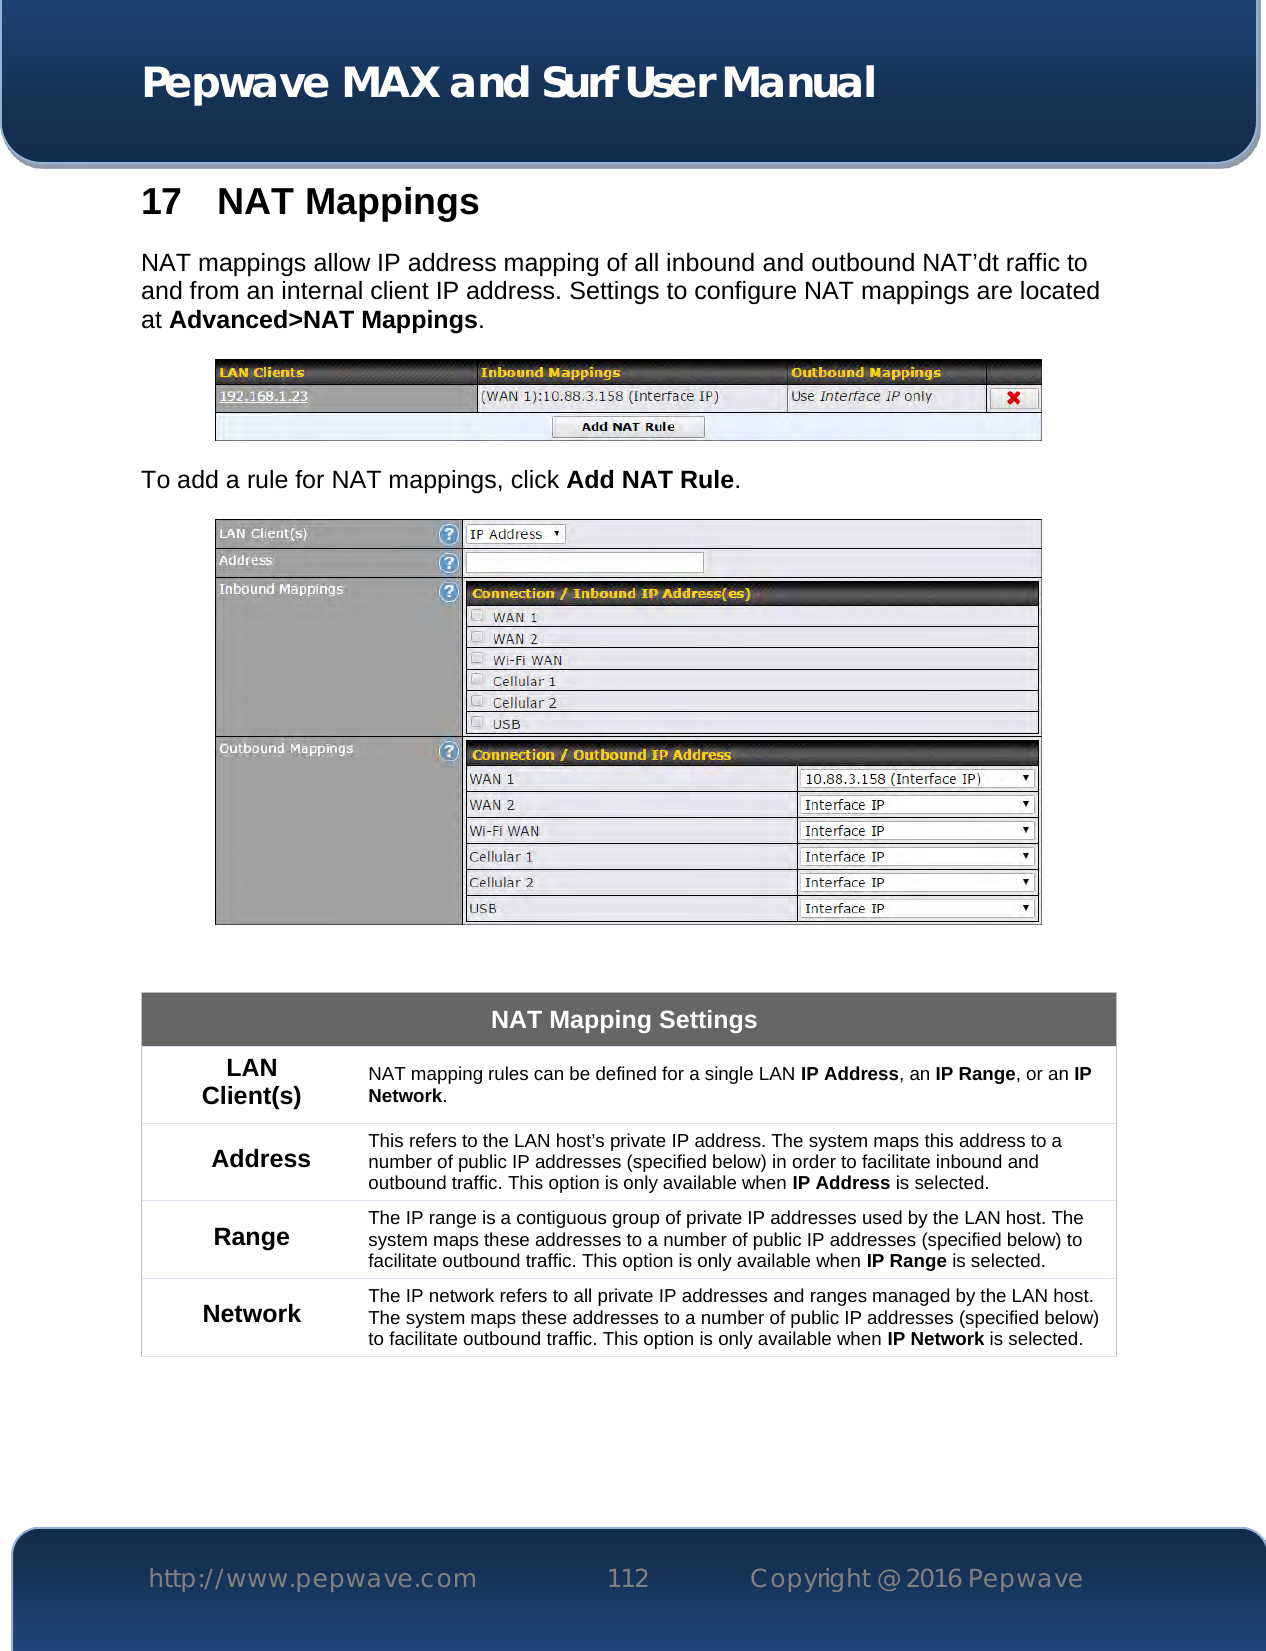  Pepwave MAX and Surf User Manual http://www.pepwave.com 112   Copyright @ 2016 Pepwave   17 NAT Mappings NAT mappings allow IP address mapping of all inbound and outbound NAT’dt raffic to and from an internal client IP address. Settings to configure NAT mappings are located at Advanced&gt;NAT Mappings.  To add a rule for NAT mappings, click Add NAT Rule.   NAT Mapping Settings LAN Client(s) NAT mapping rules can be defined for a single LAN IP Address, an IP Range, or an IP Network. Address This refers to the LAN host’s private IP address. The system maps this address to a number of public IP addresses (specified below) in order to facilitate inbound and outbound traffic. This option is only available when IP Address is selected. Range The IP range is a contiguous group of private IP addresses used by the LAN host. The system maps these addresses to a number of public IP addresses (specified below) to facilitate outbound traffic. This option is only available when IP Range is selected. Network The IP network refers to all private IP addresses and ranges managed by the LAN host. The system maps these addresses to a number of public IP addresses (specified below) to facilitate outbound traffic. This option is only available when IP Network is selected. 